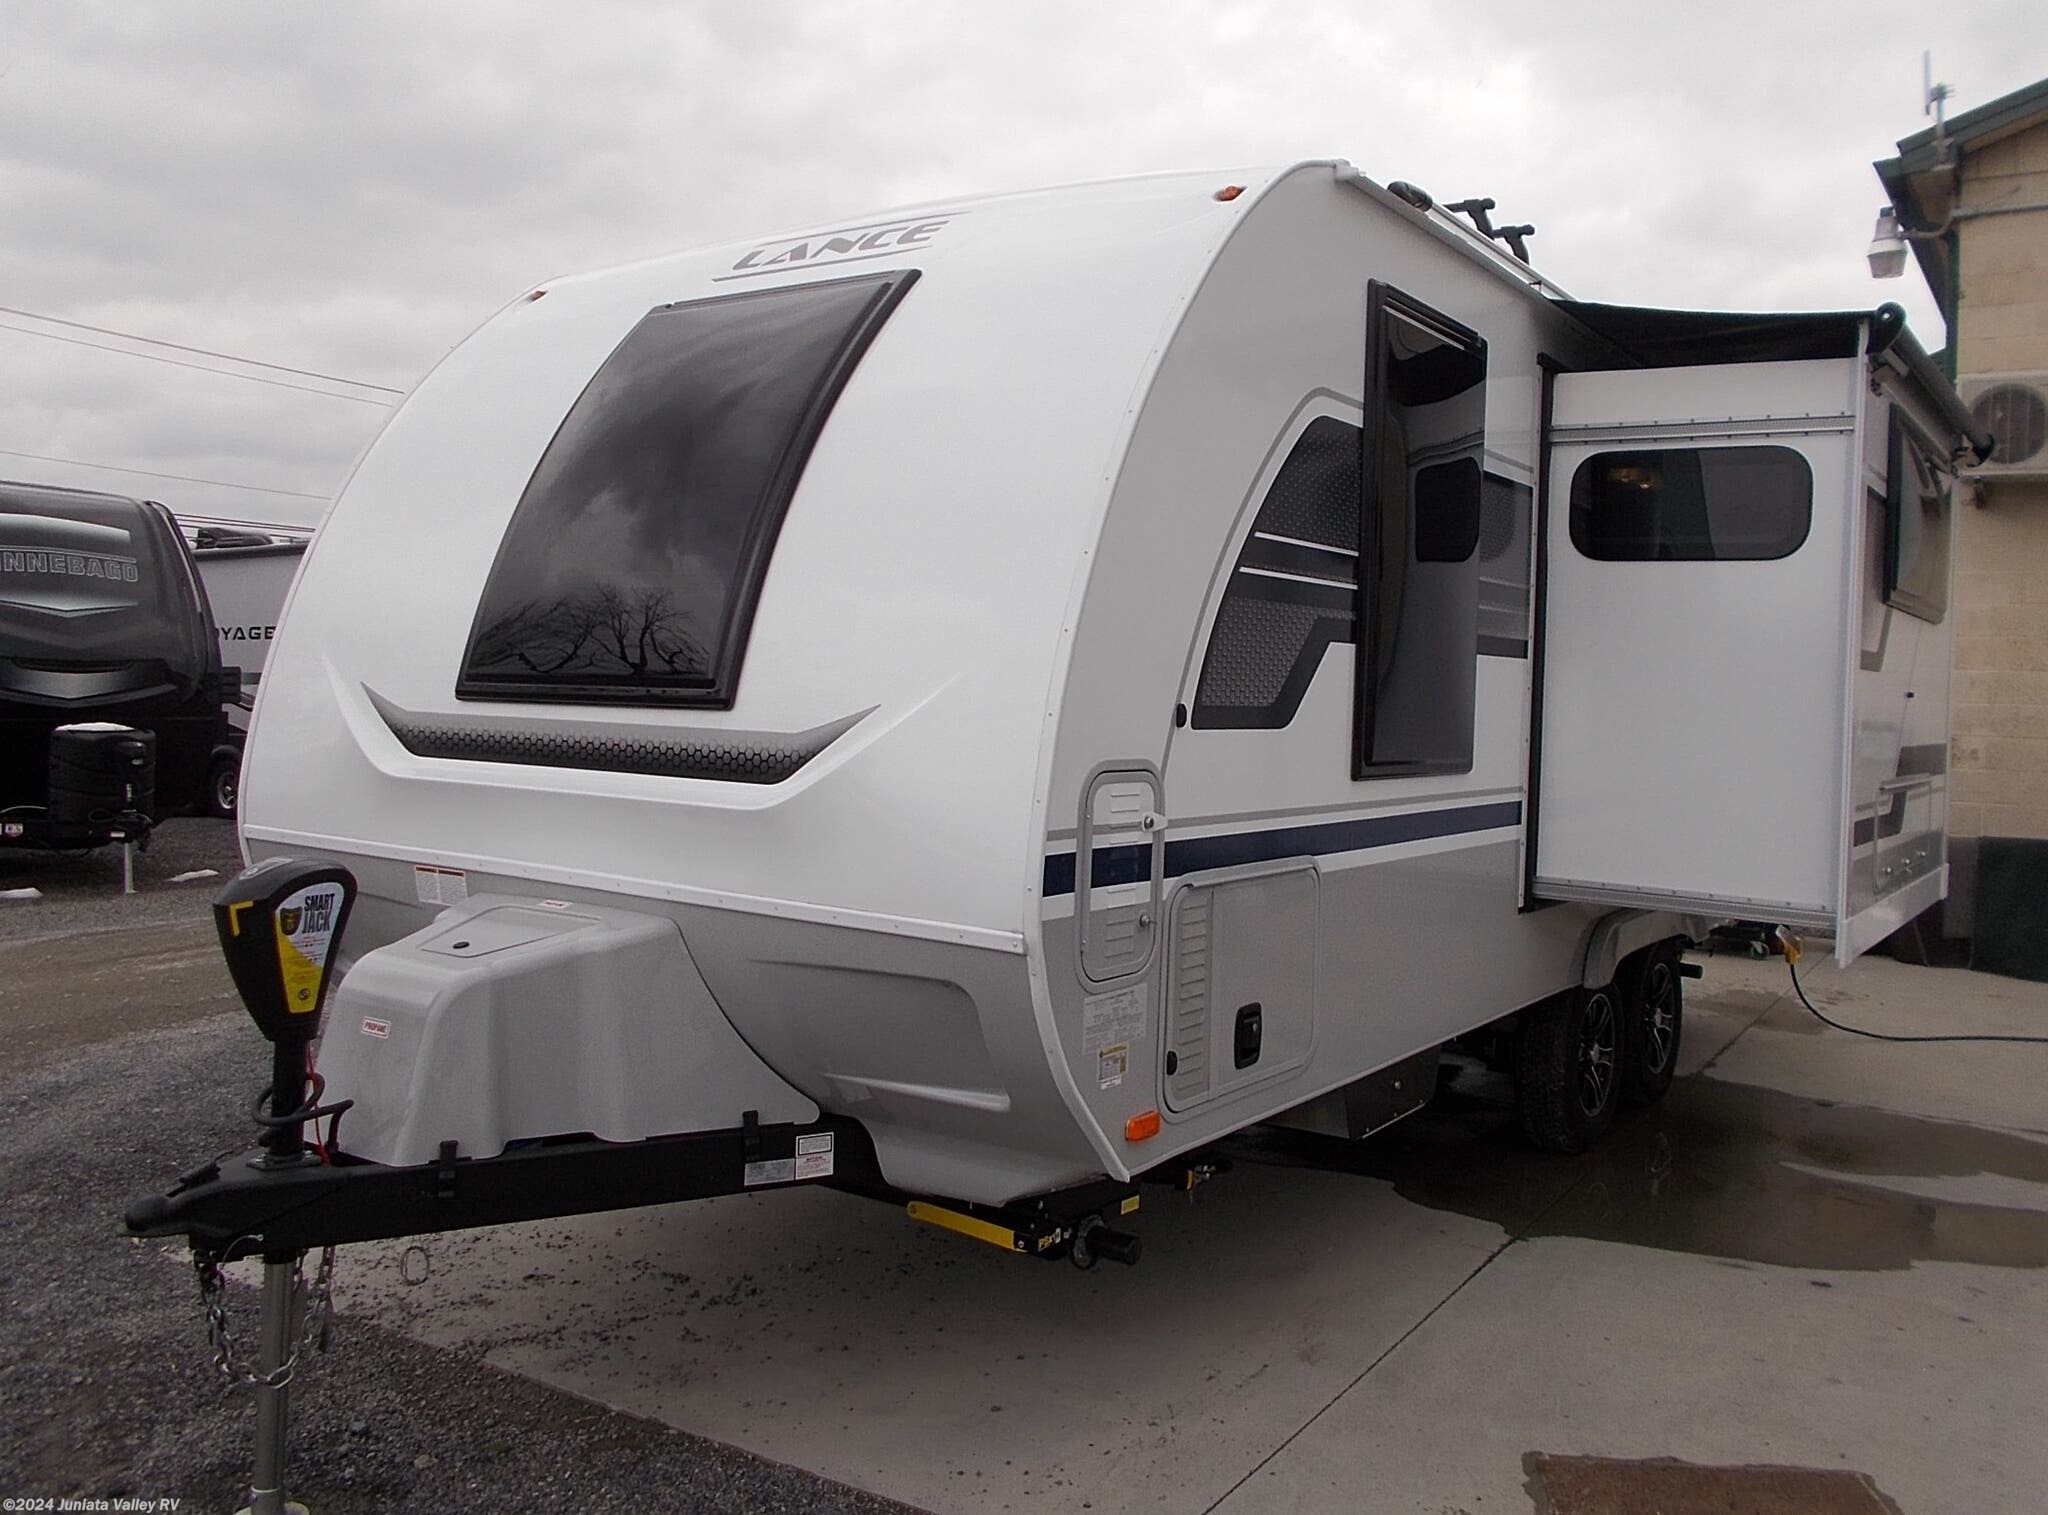 how much does a lance 1985 travel trailer cost